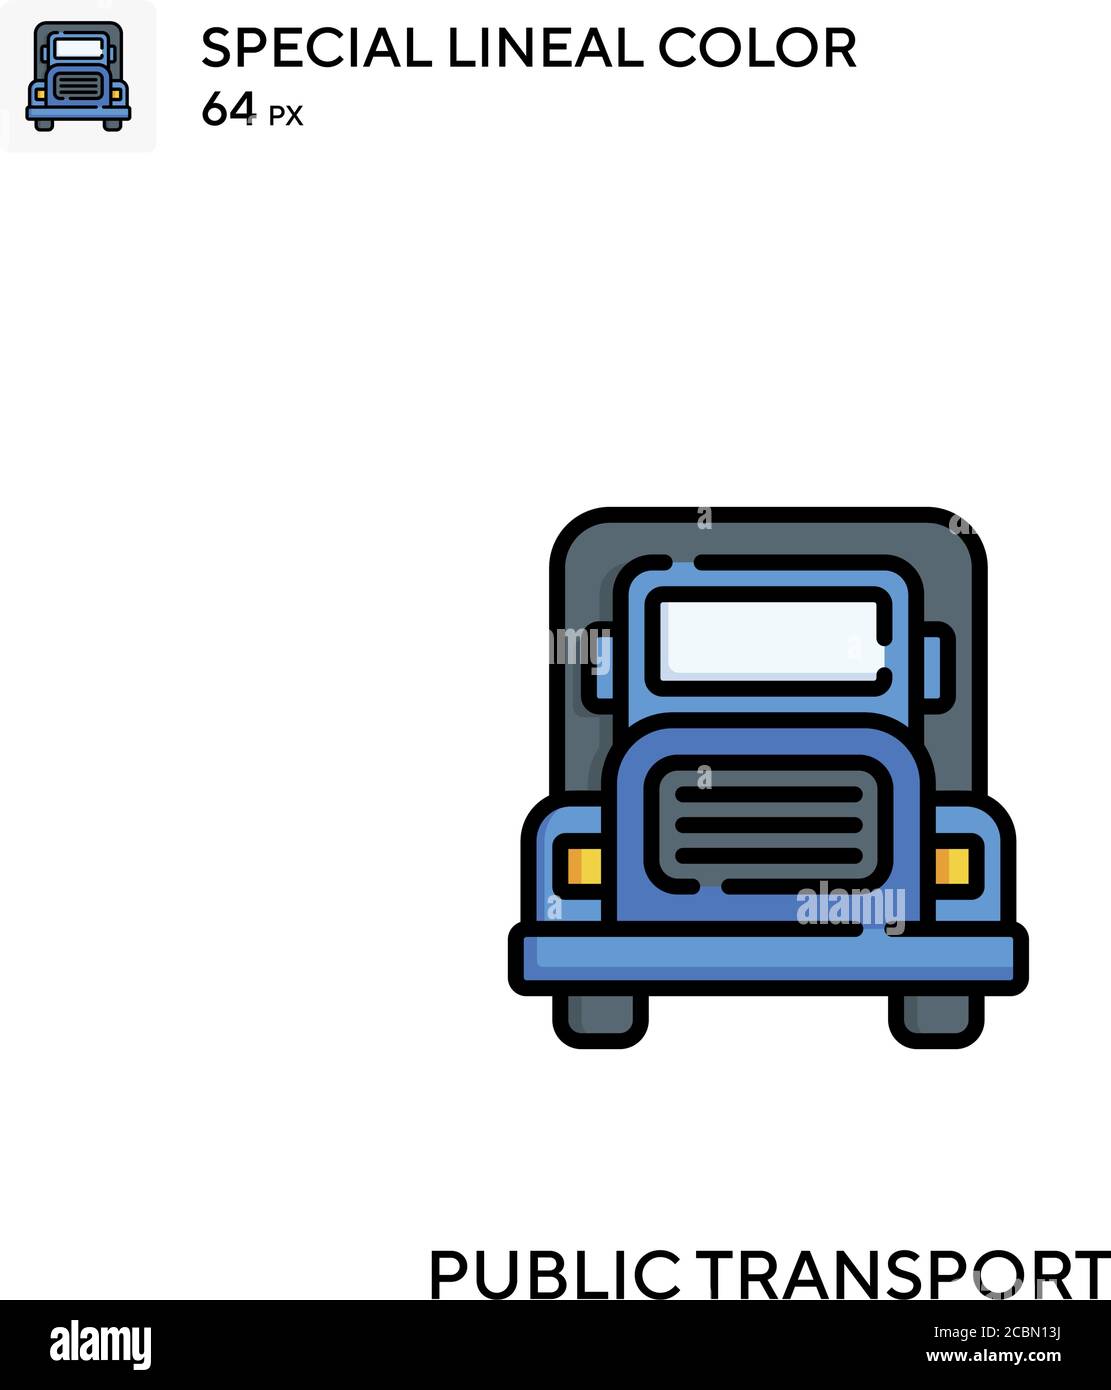 Public transport Special lineal color vector icon. Public transport icons for your business project Stock Vector